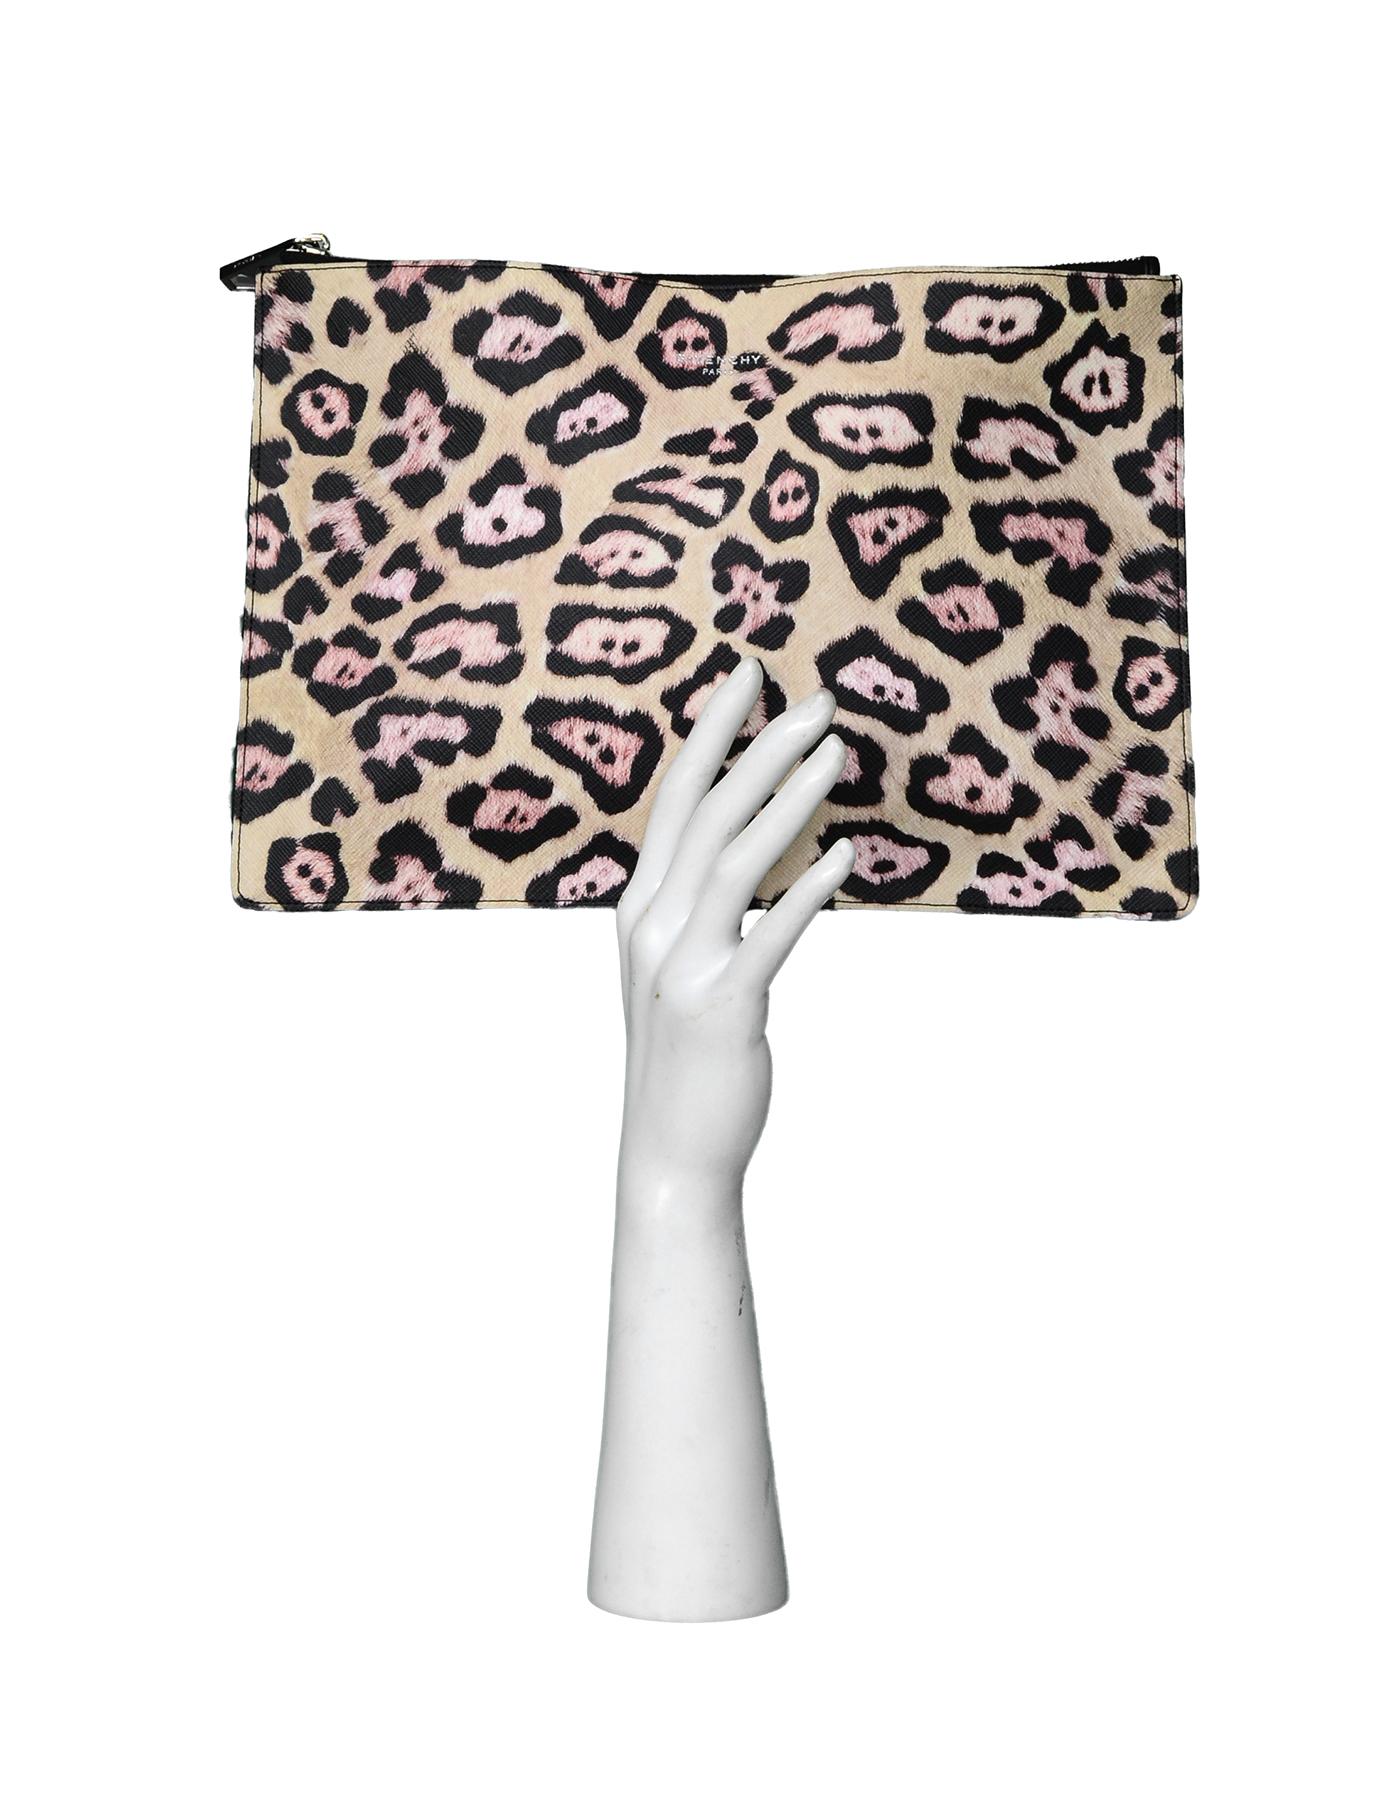 Givenchy Leopard Print Grained Leather Zip Top Clutch Bag

Made In: Romania
Year of Production: 2015
Color: Tan, brown, pink
Hardware: Silvertone
Materials: Grained leather, metal
Lining: Black textile 
Closure/Opening: Zip top
Exterior Pockets: